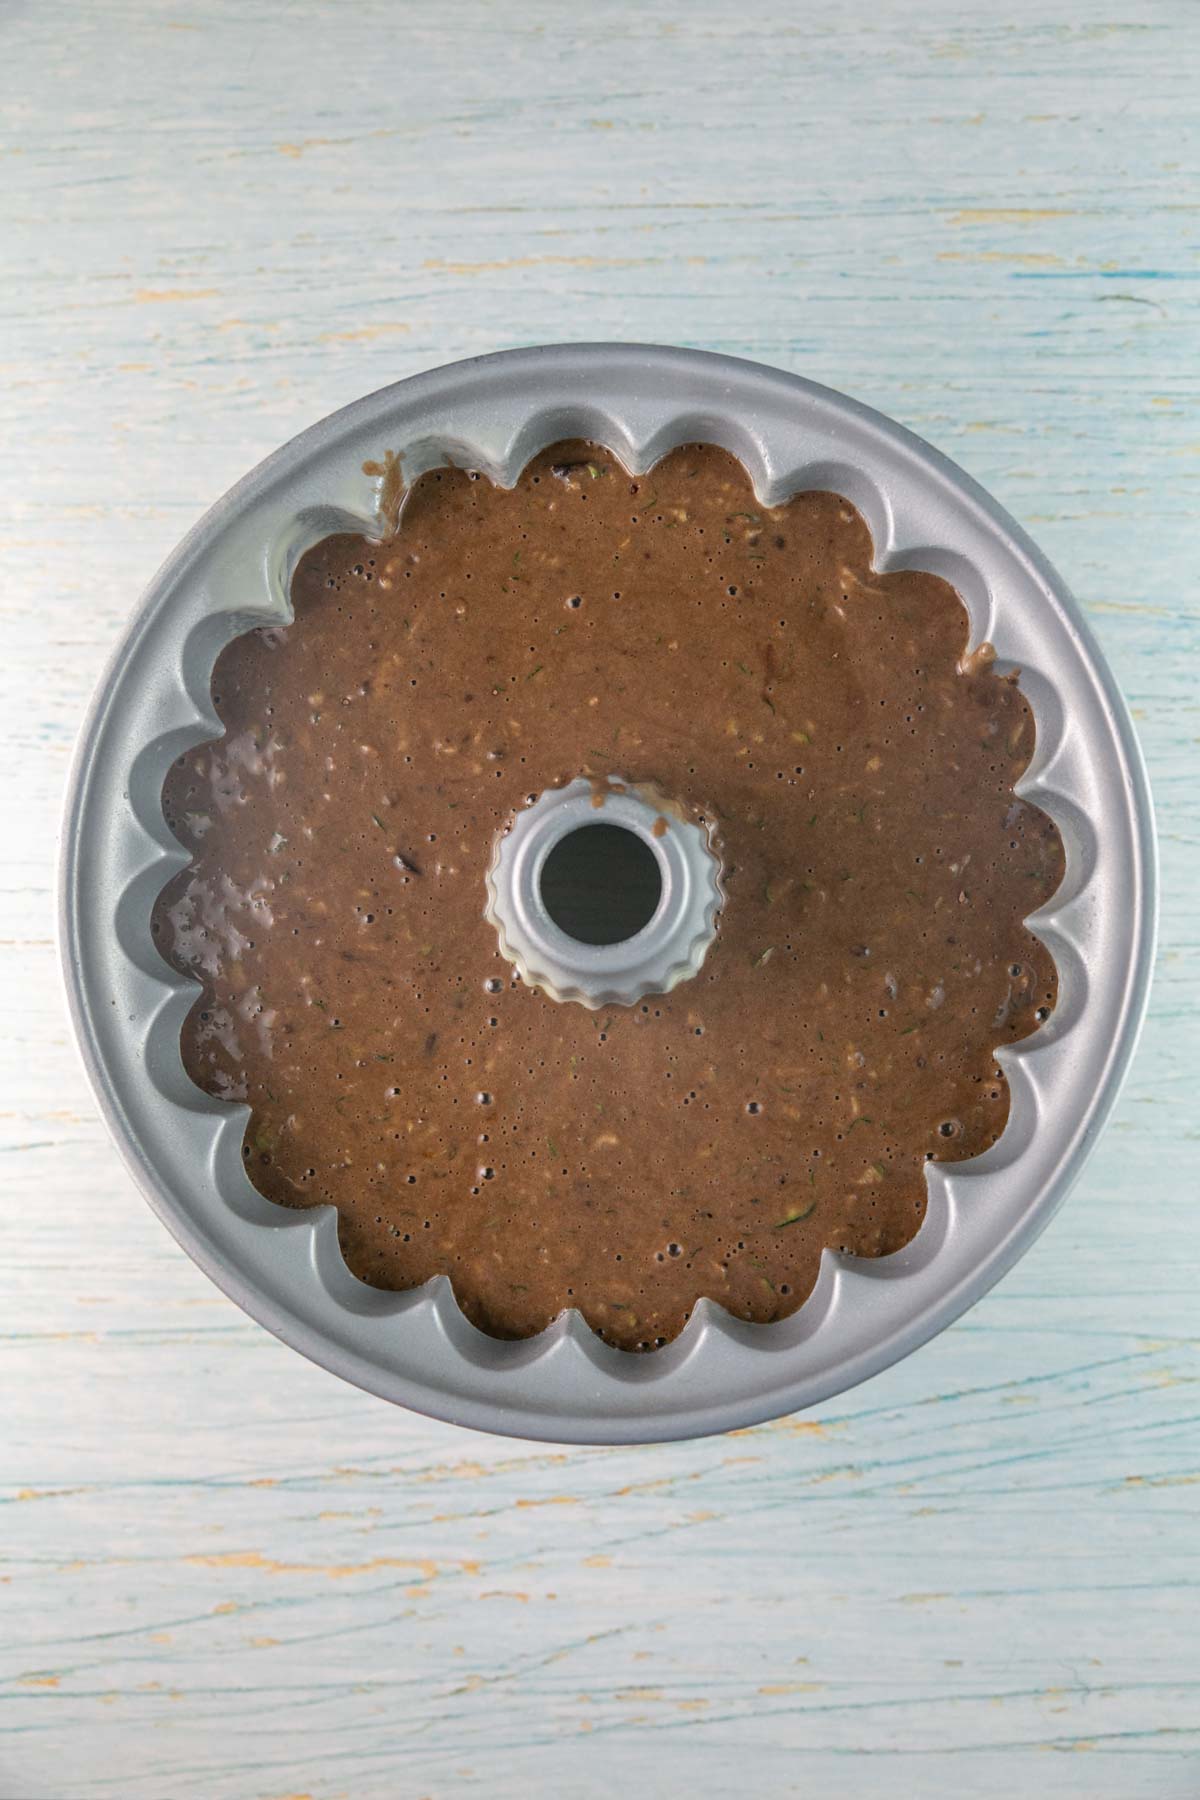 unbaked chocolate zucchini batter in a bundt pan